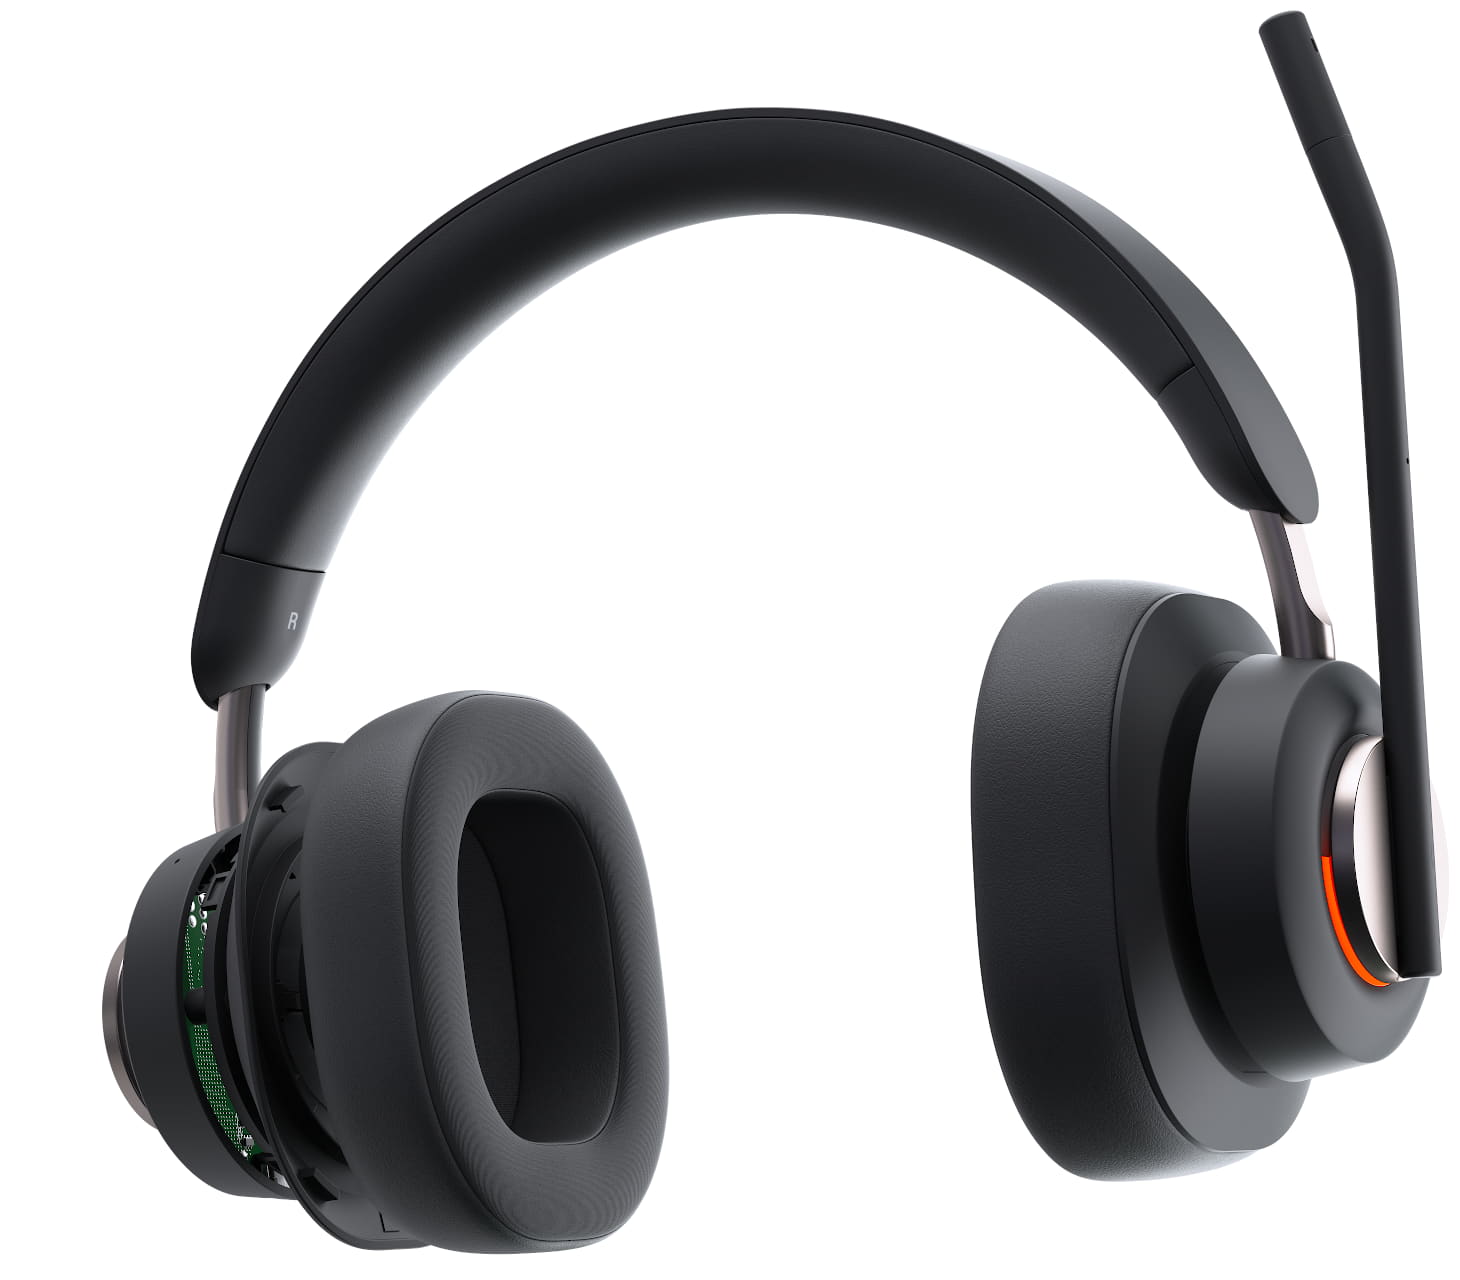 Close up front view of Kensington H3000 Bluetooth Over-Ear Headset with busy light illuminated, mic in flip-to-mute position and right ear cup expanding to show technology